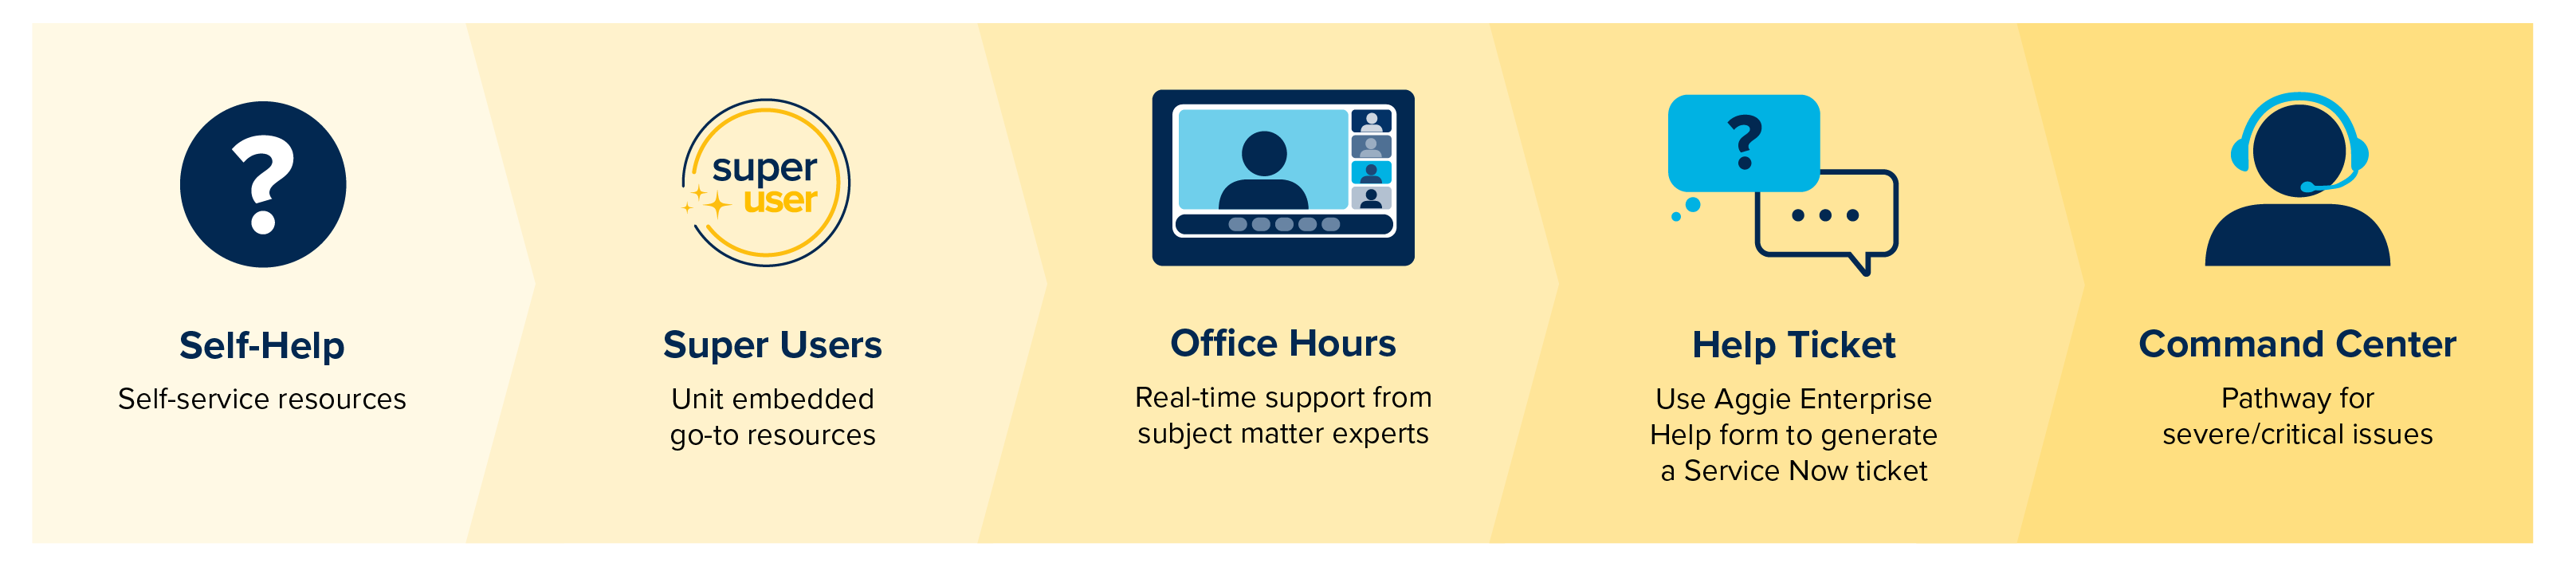 Self-Help, Super Users, Office Hours, Help Ticket, and Command Center icons